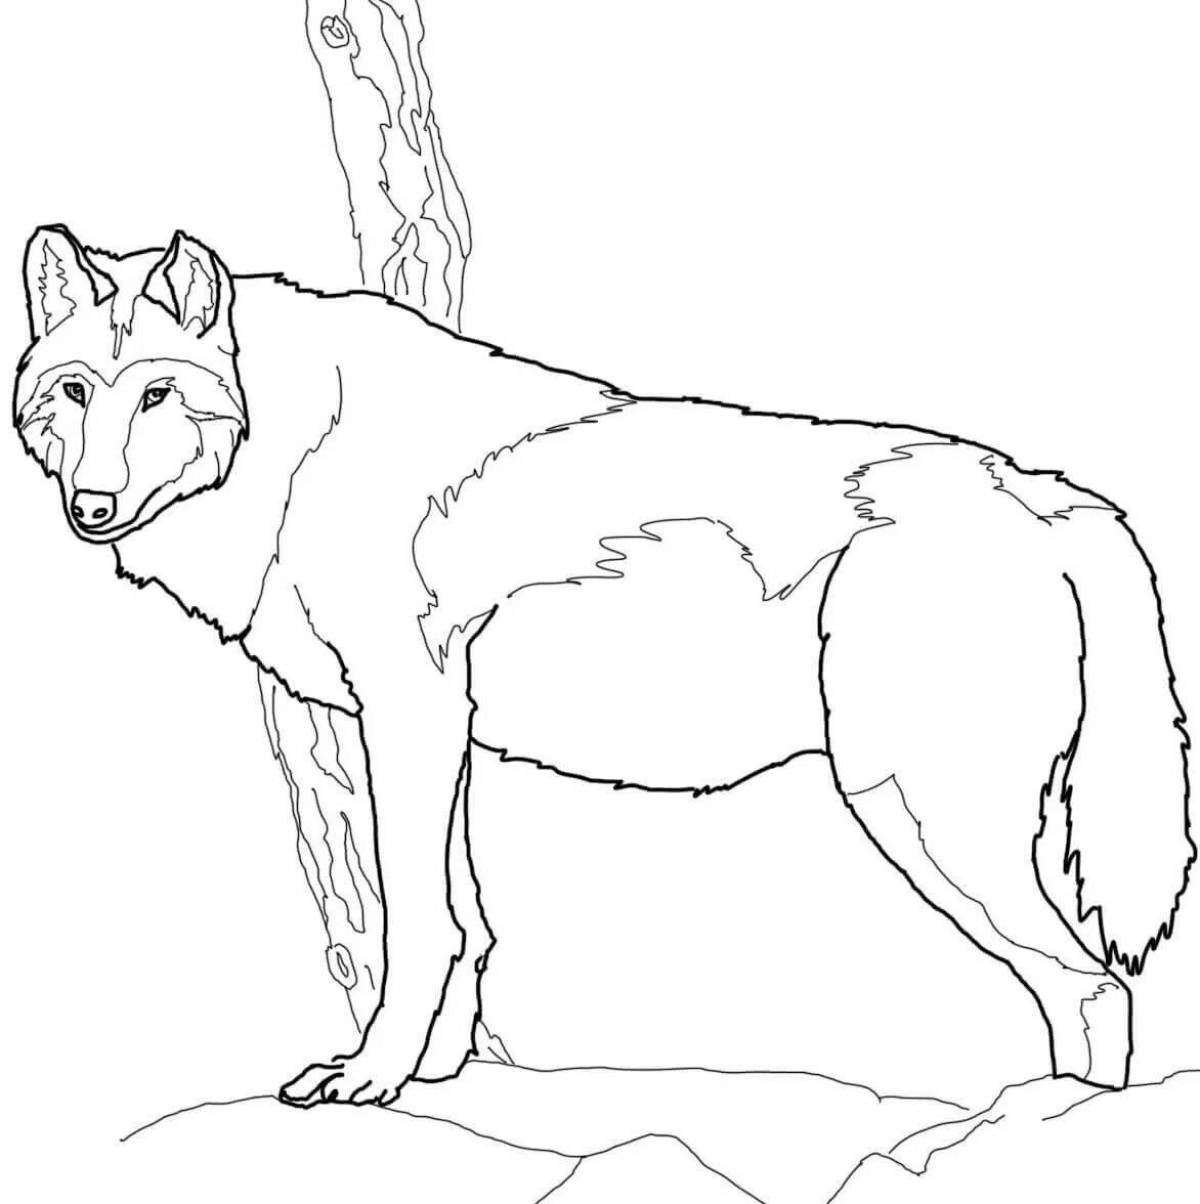 Royal winter wolf coloring page